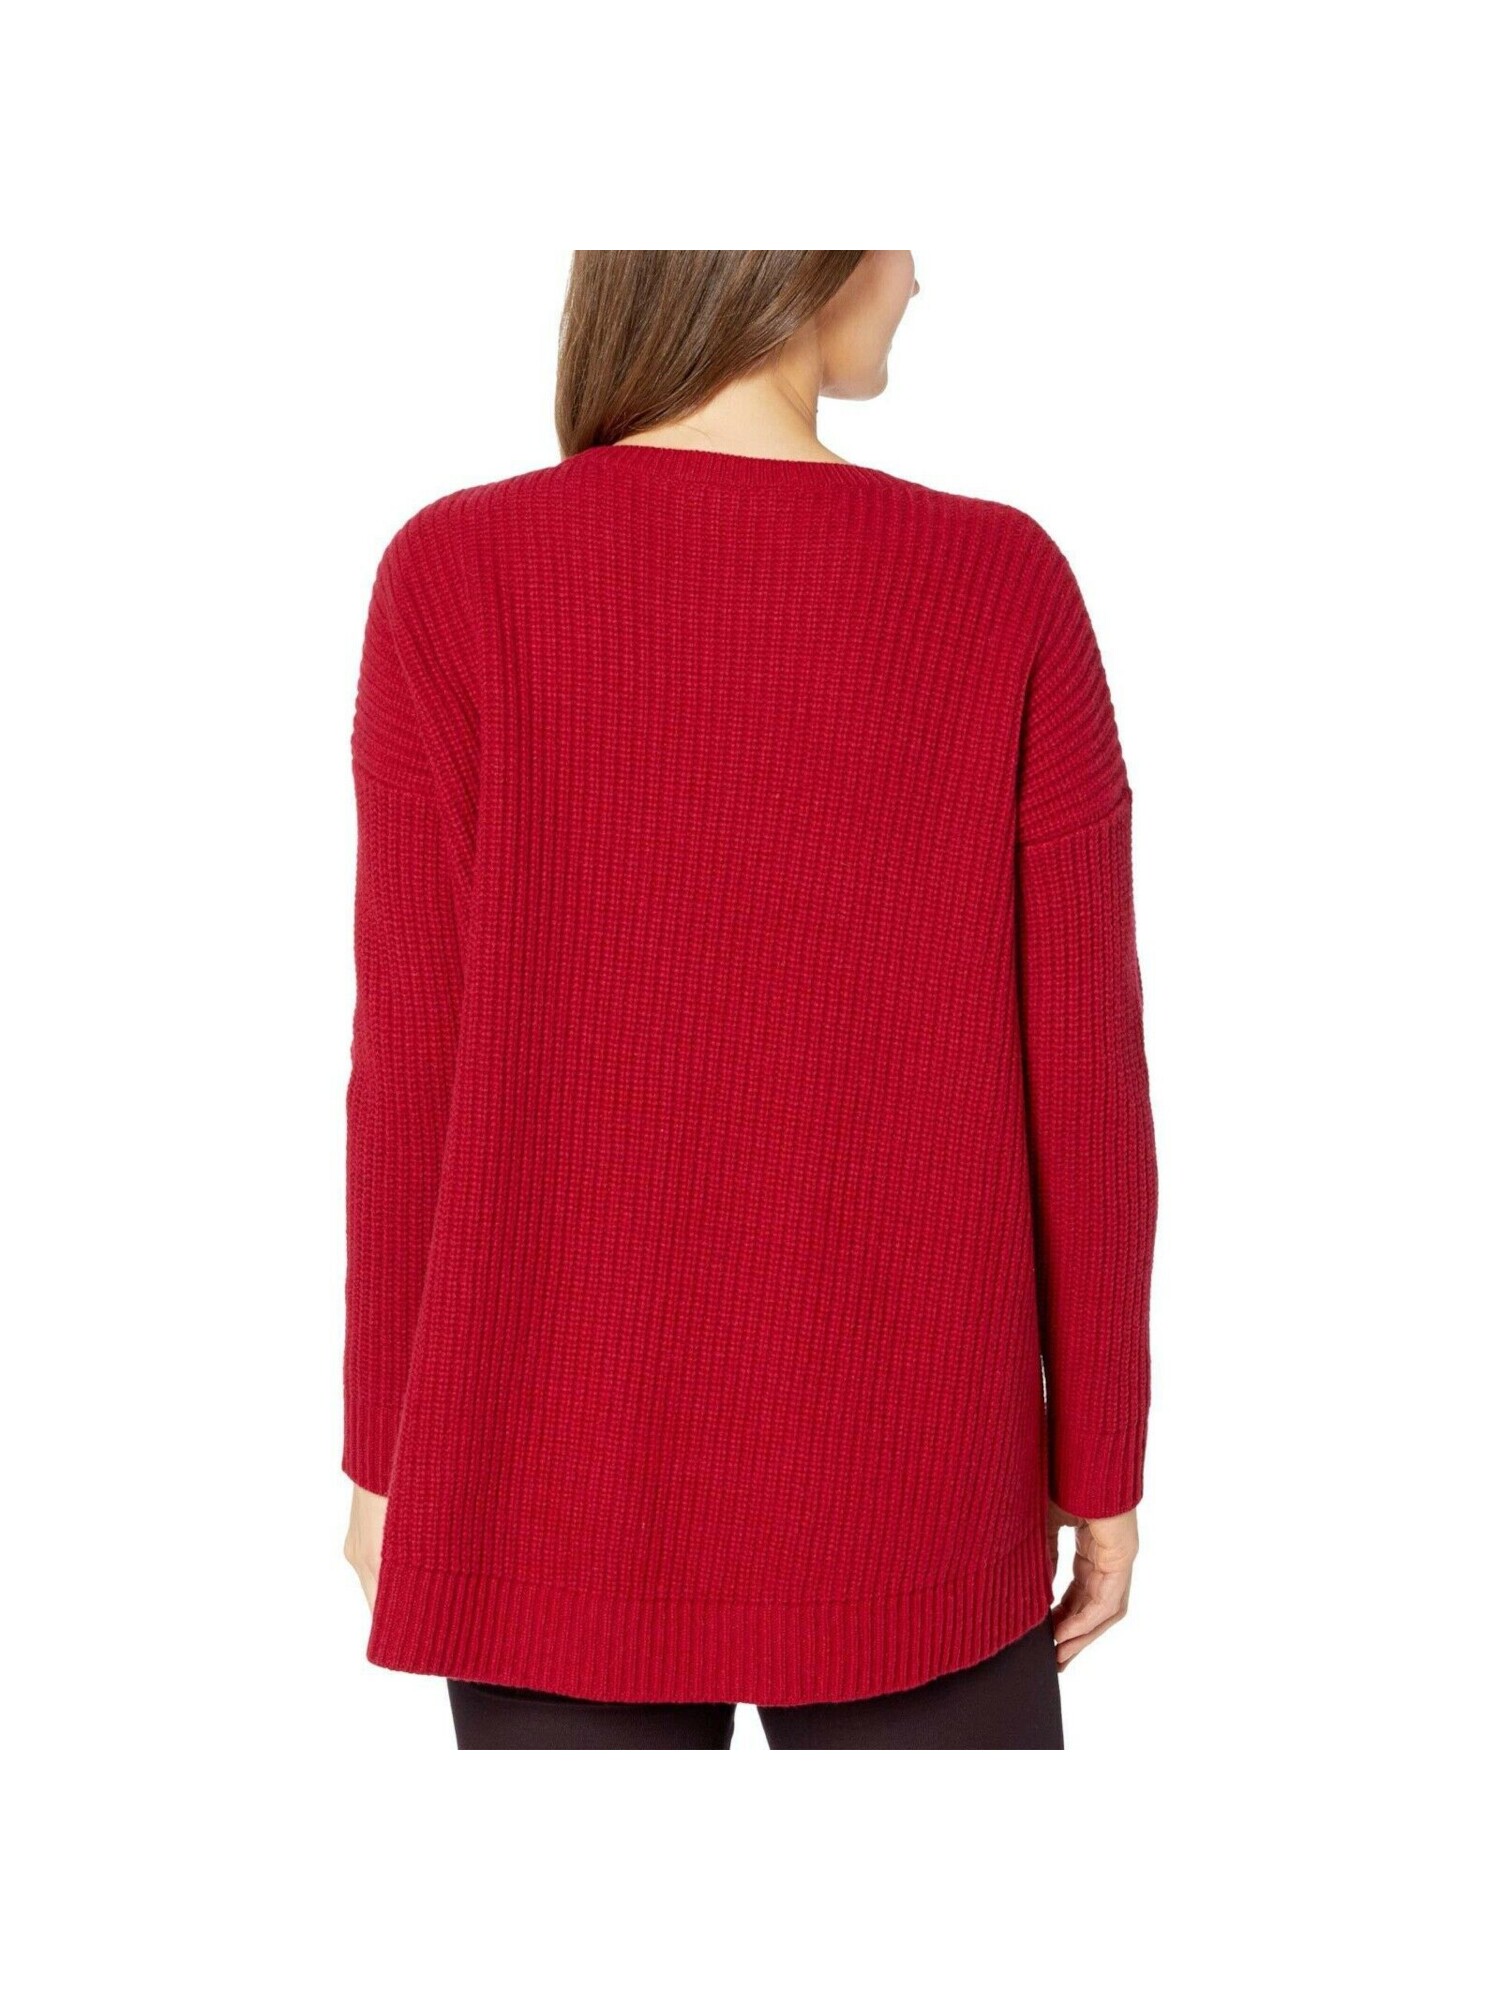 EILEEN FISHER Womens Red Knit Ribbed Textured Long Sleeve Scoop Neck Hi-Lo Sweater Petites PM